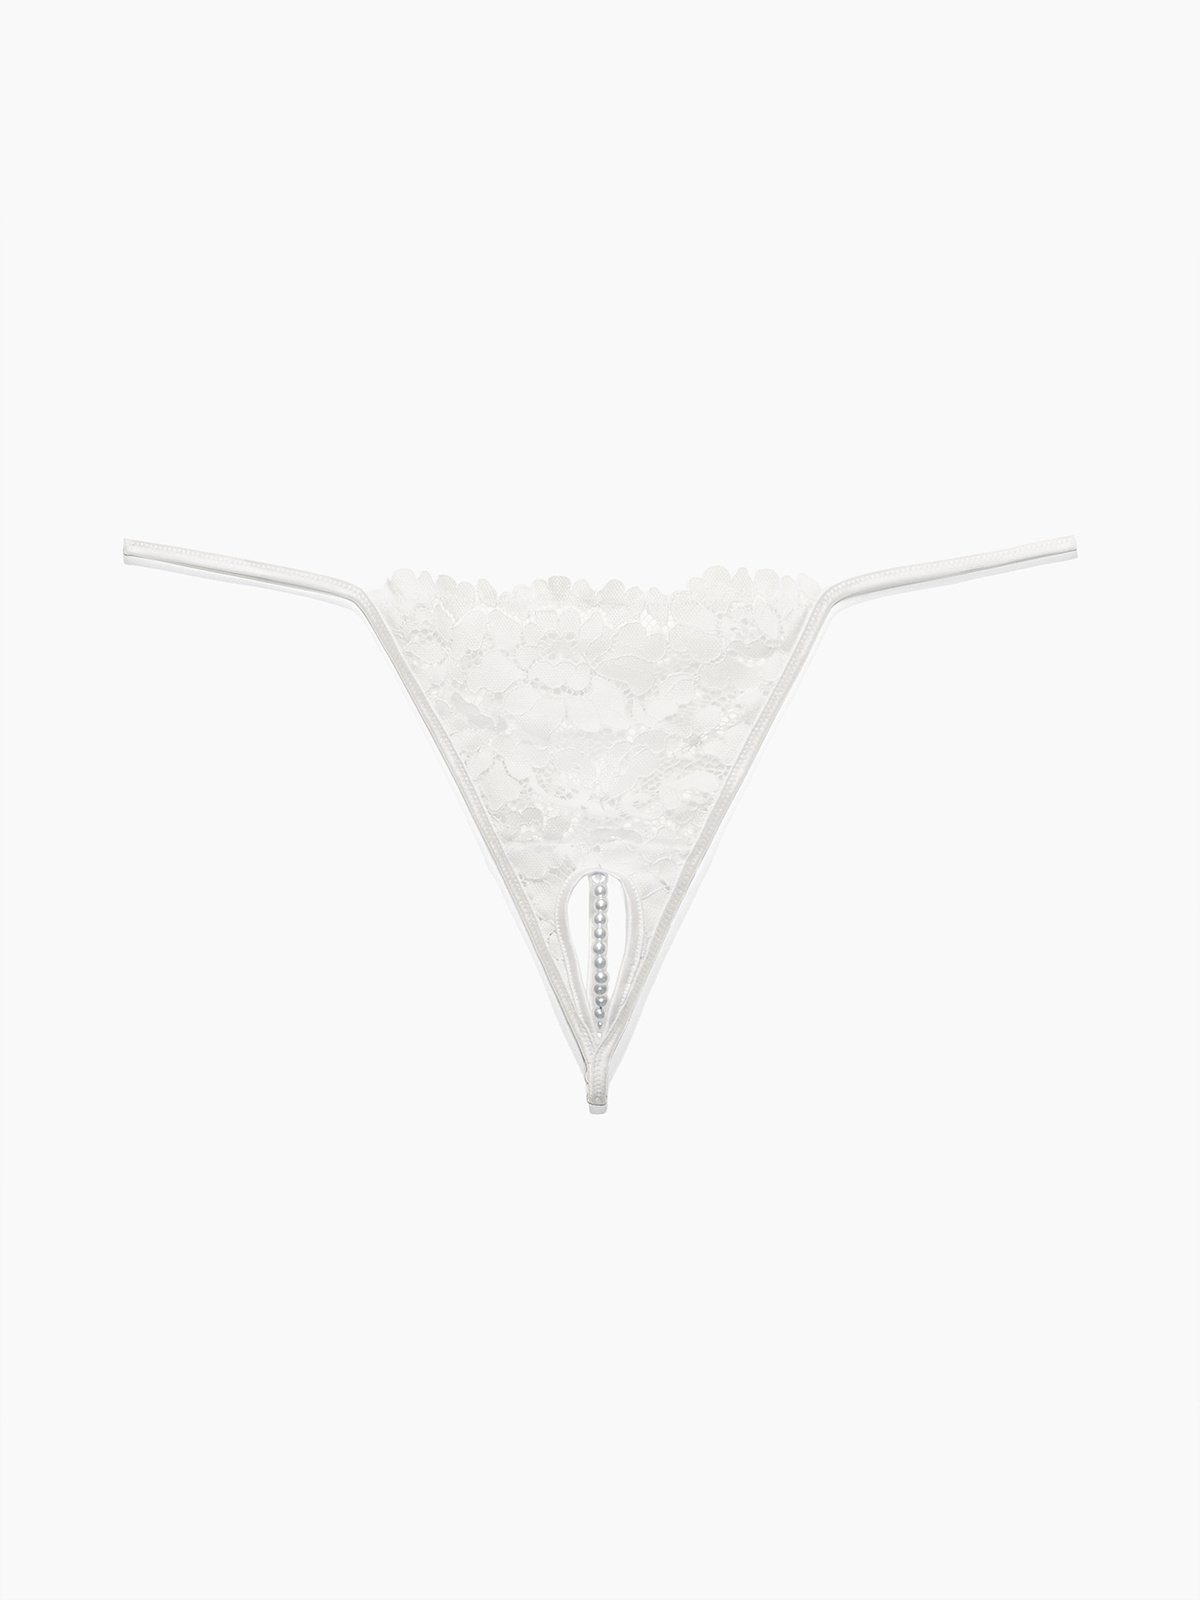 https://cdn.savagex.com/media/images/products/AC1937136-1196/CROTCHLESS-STRING-OF-PEARLS-THONG-AC1937136-1196-LAYDOWN-1200x1600.jpg